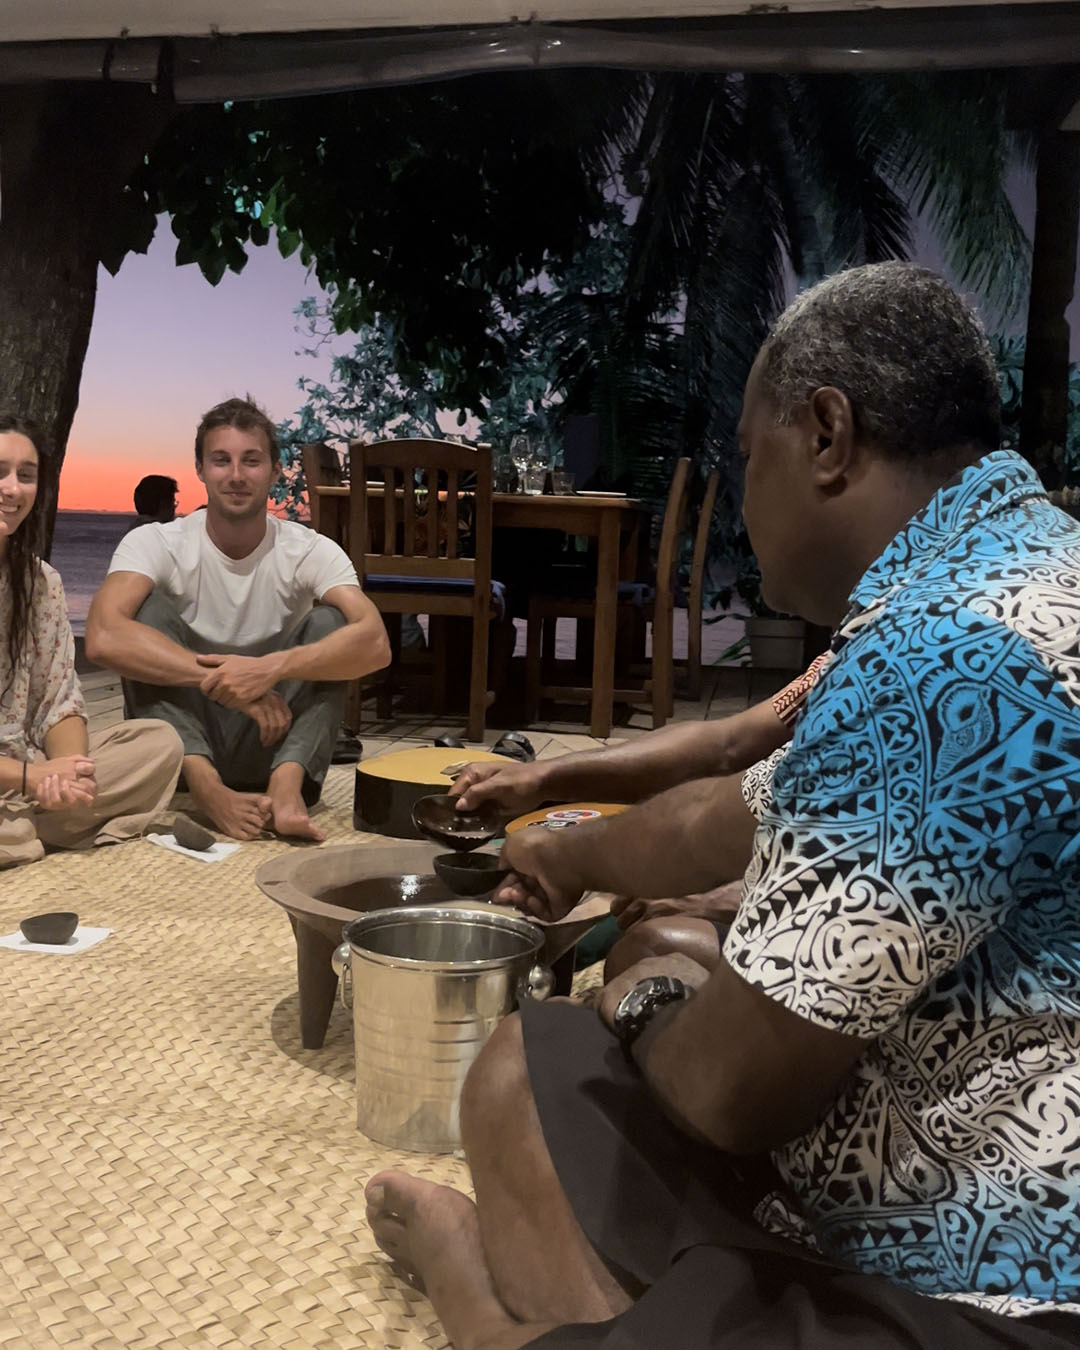 Kava ceremony at Blue Lagoon Resort with the sunset in the background